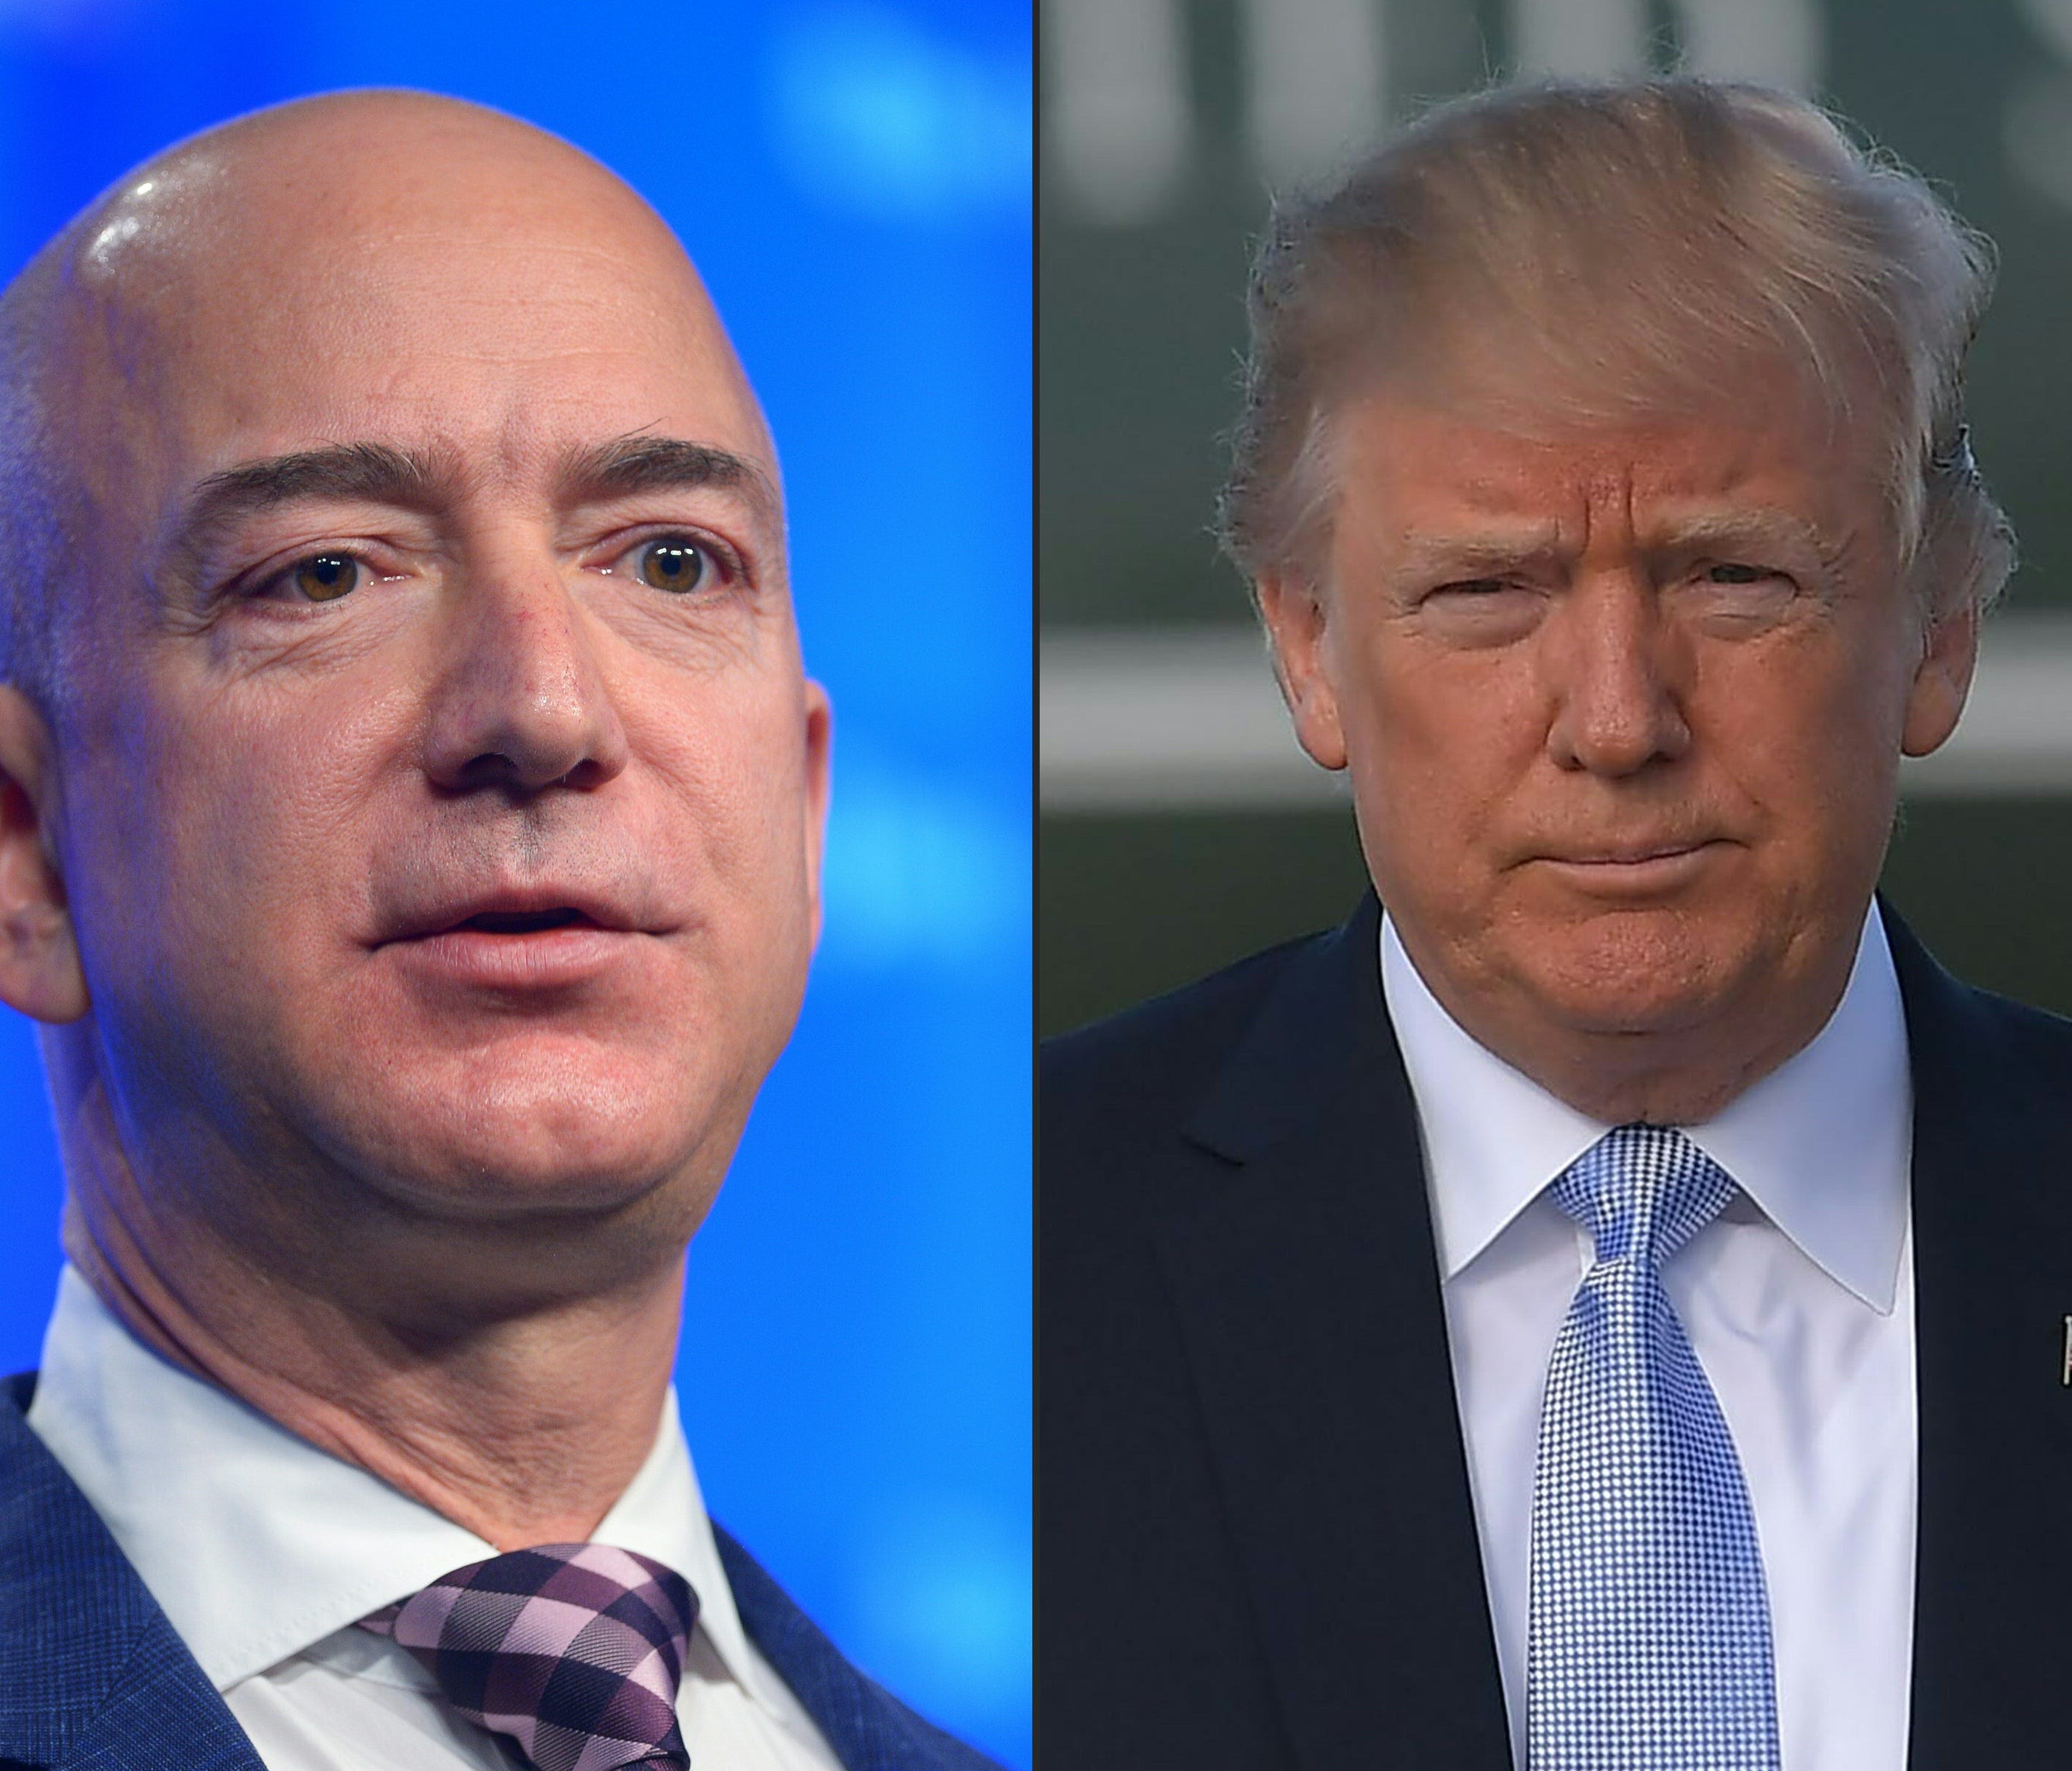 President Trump has attacked Amazon, owned by Jeff Bezos, at left.